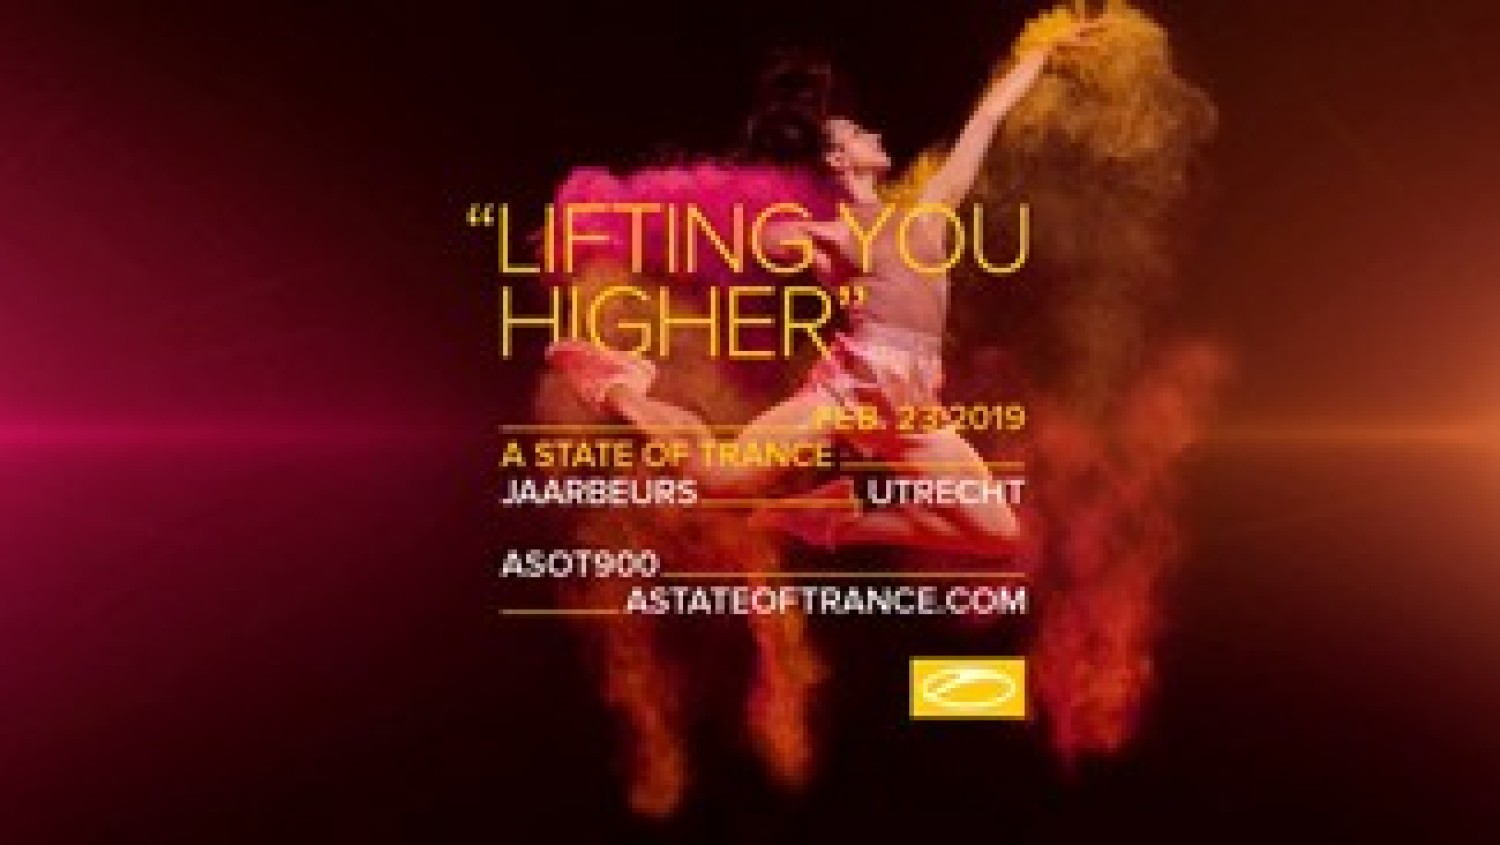 Party nieuws: A State of Trance 900 presenteert fenomenale line-up!